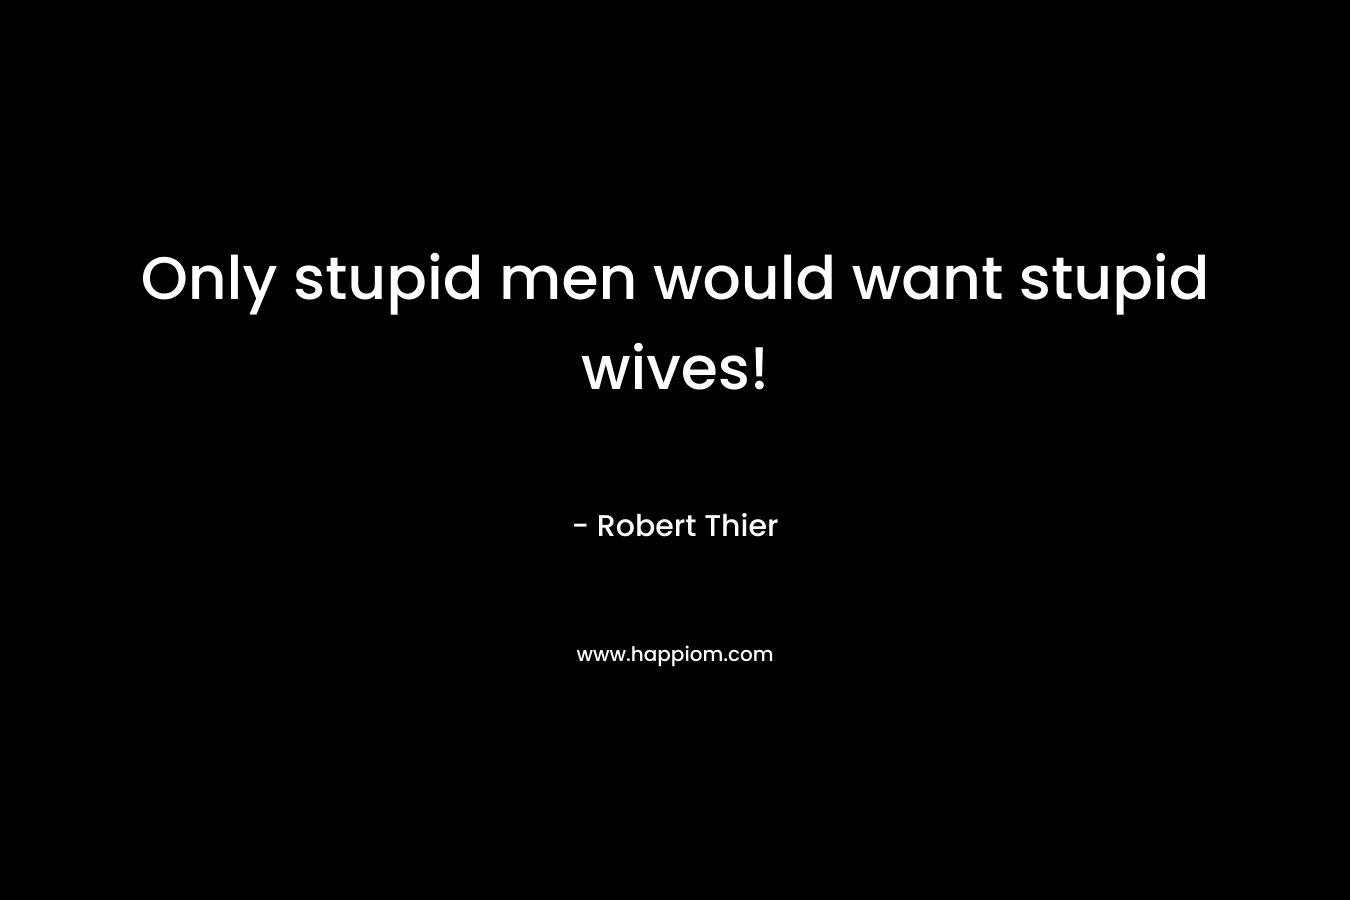 Only stupid men would want stupid wives!